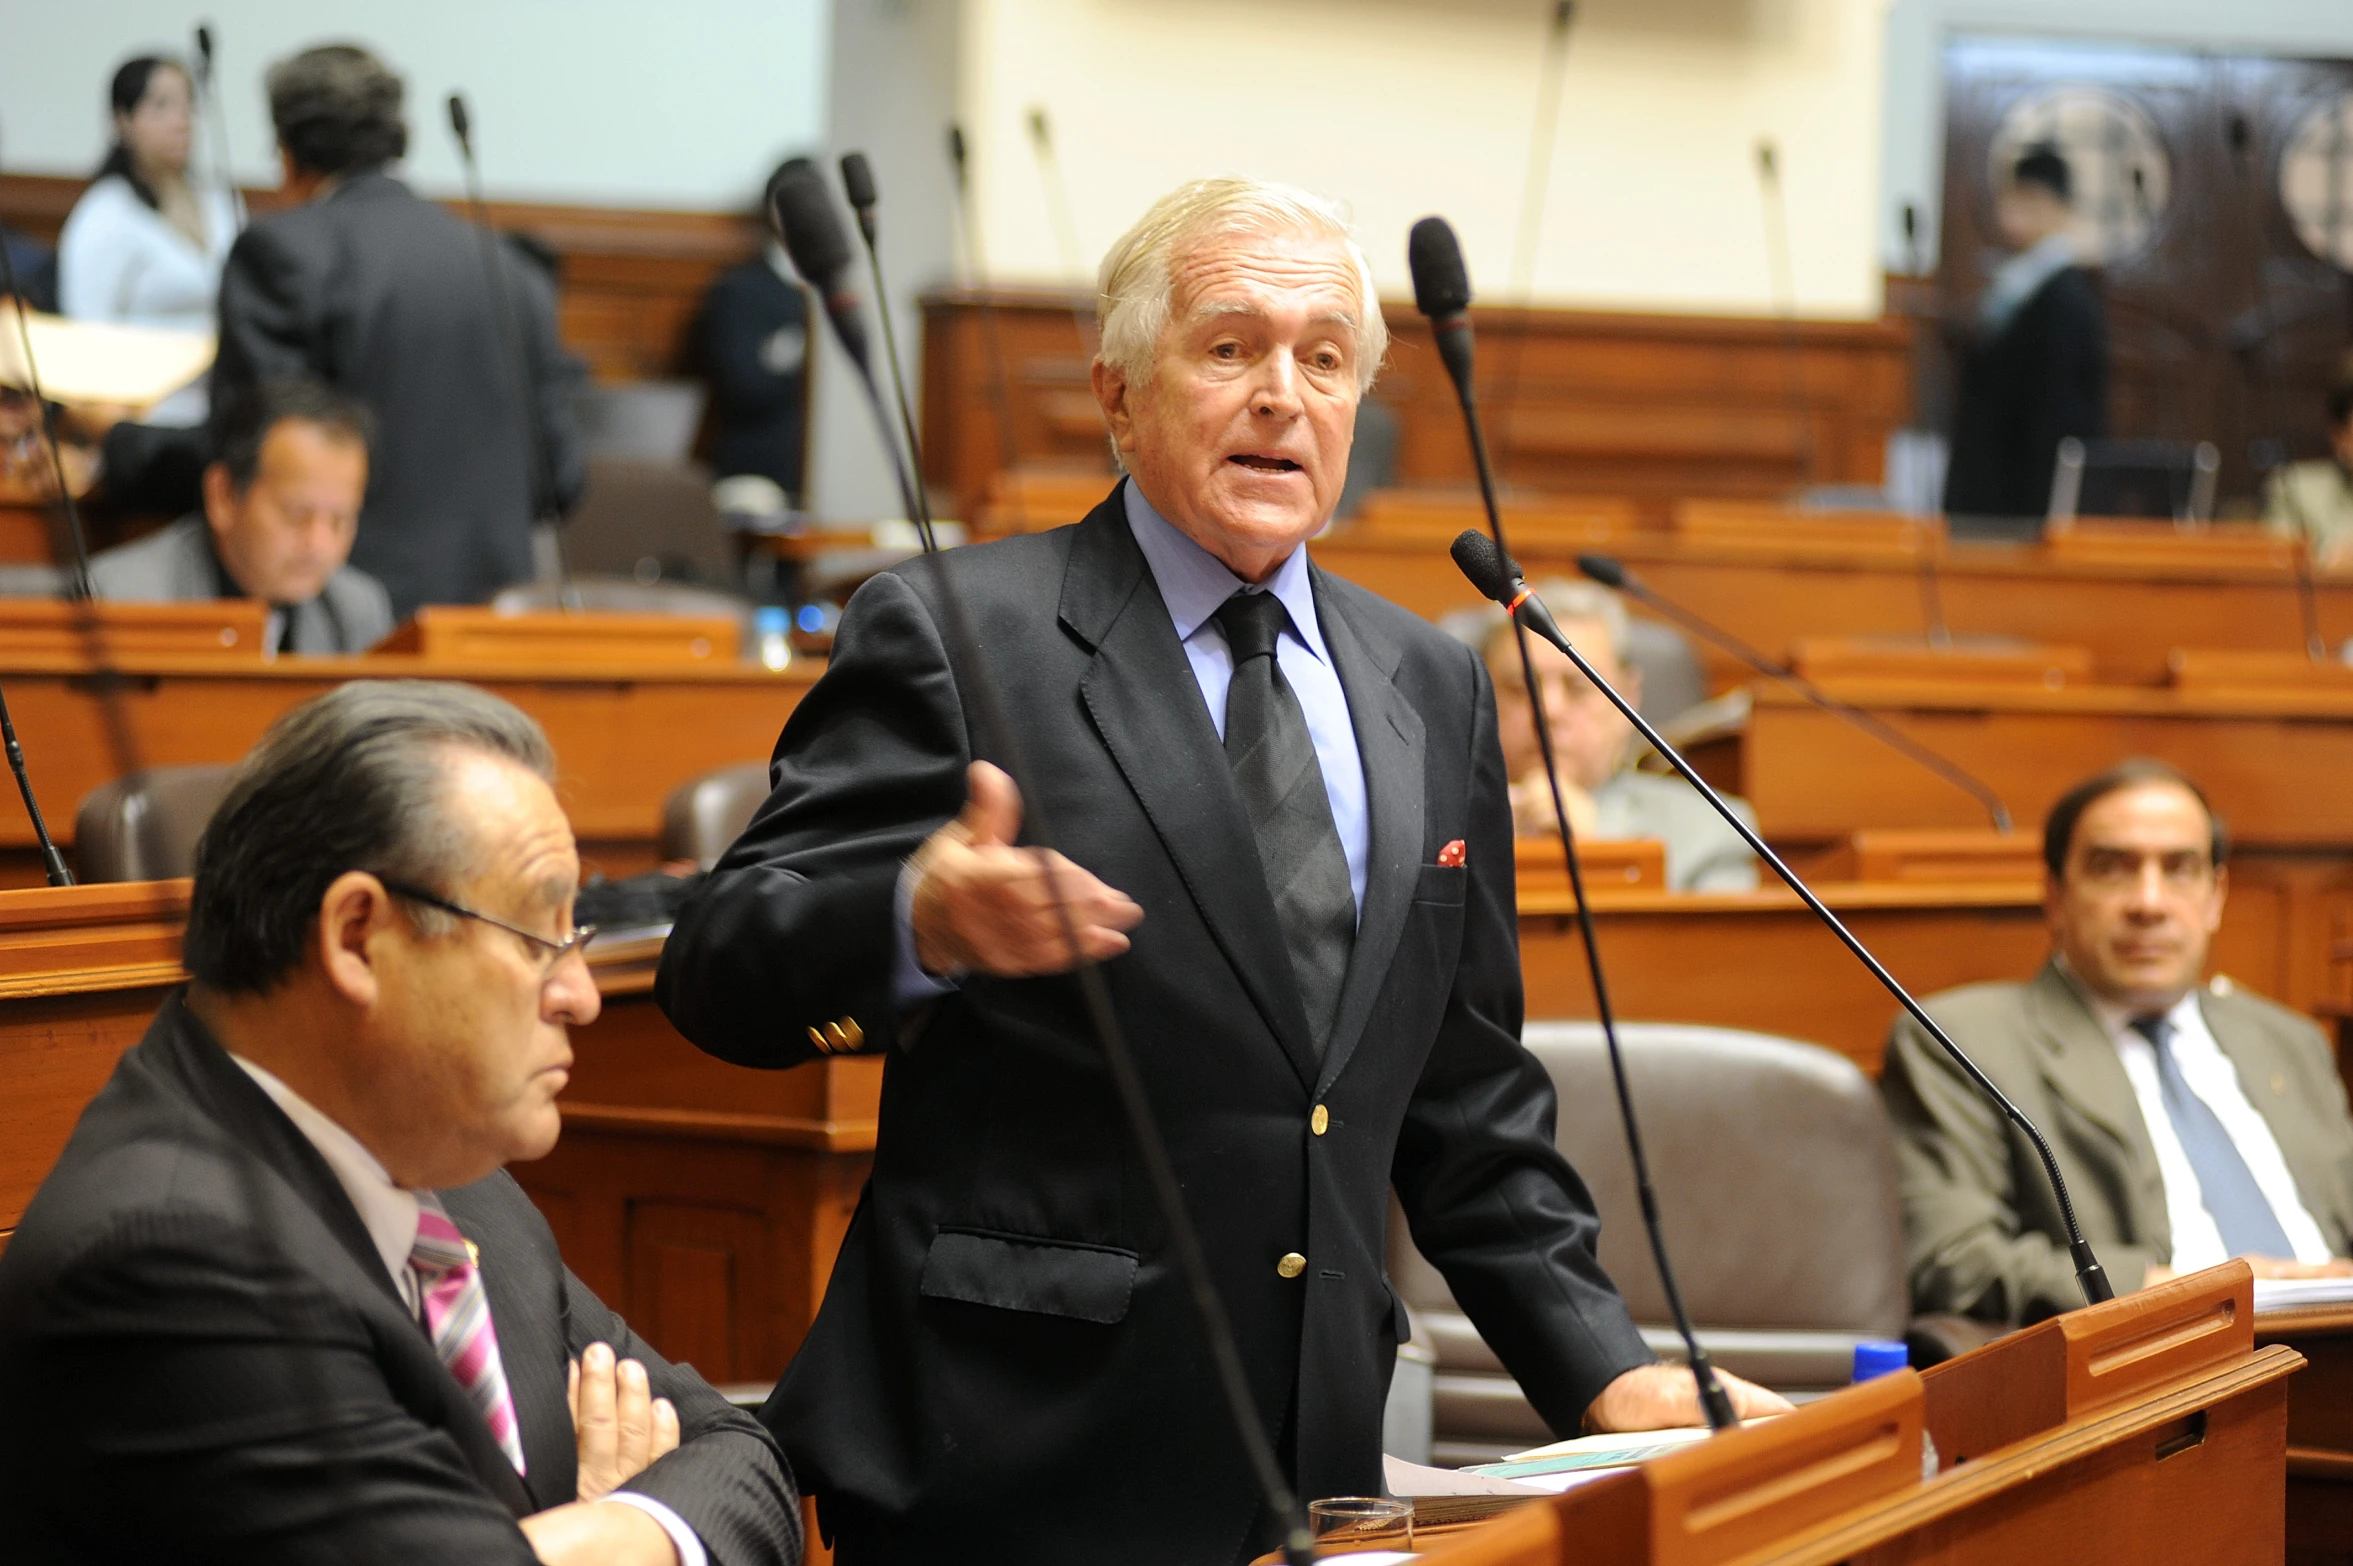 a man with grey hair and a black suit and tie speaking in the assembly chamber